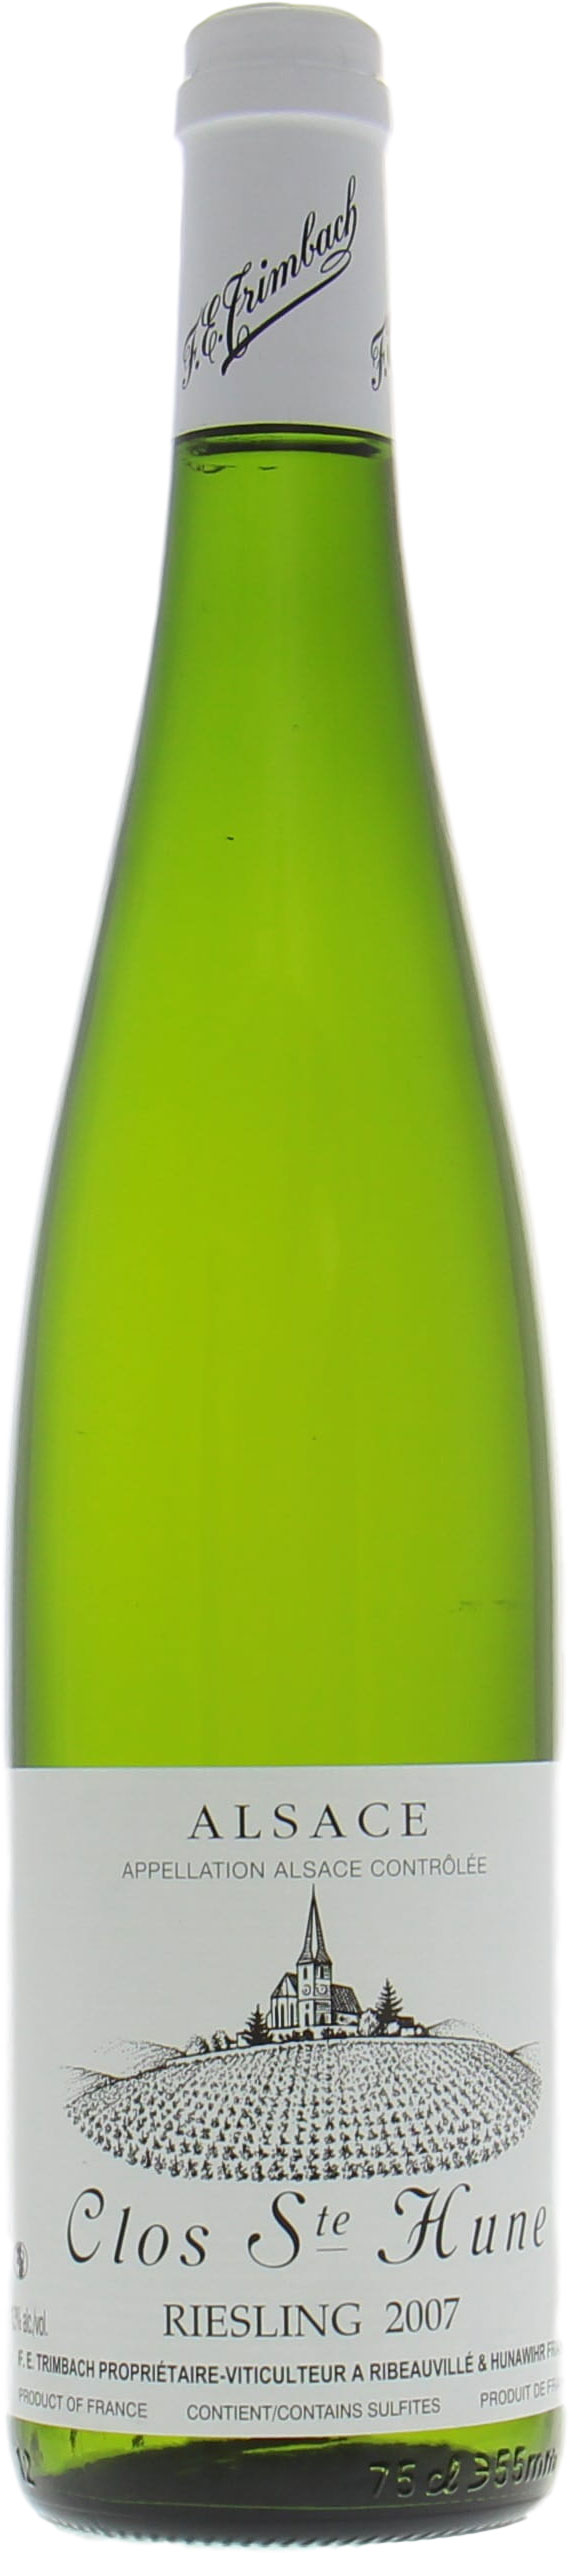 Trimbach - Riesling Clos St Hune 2007 Perfect